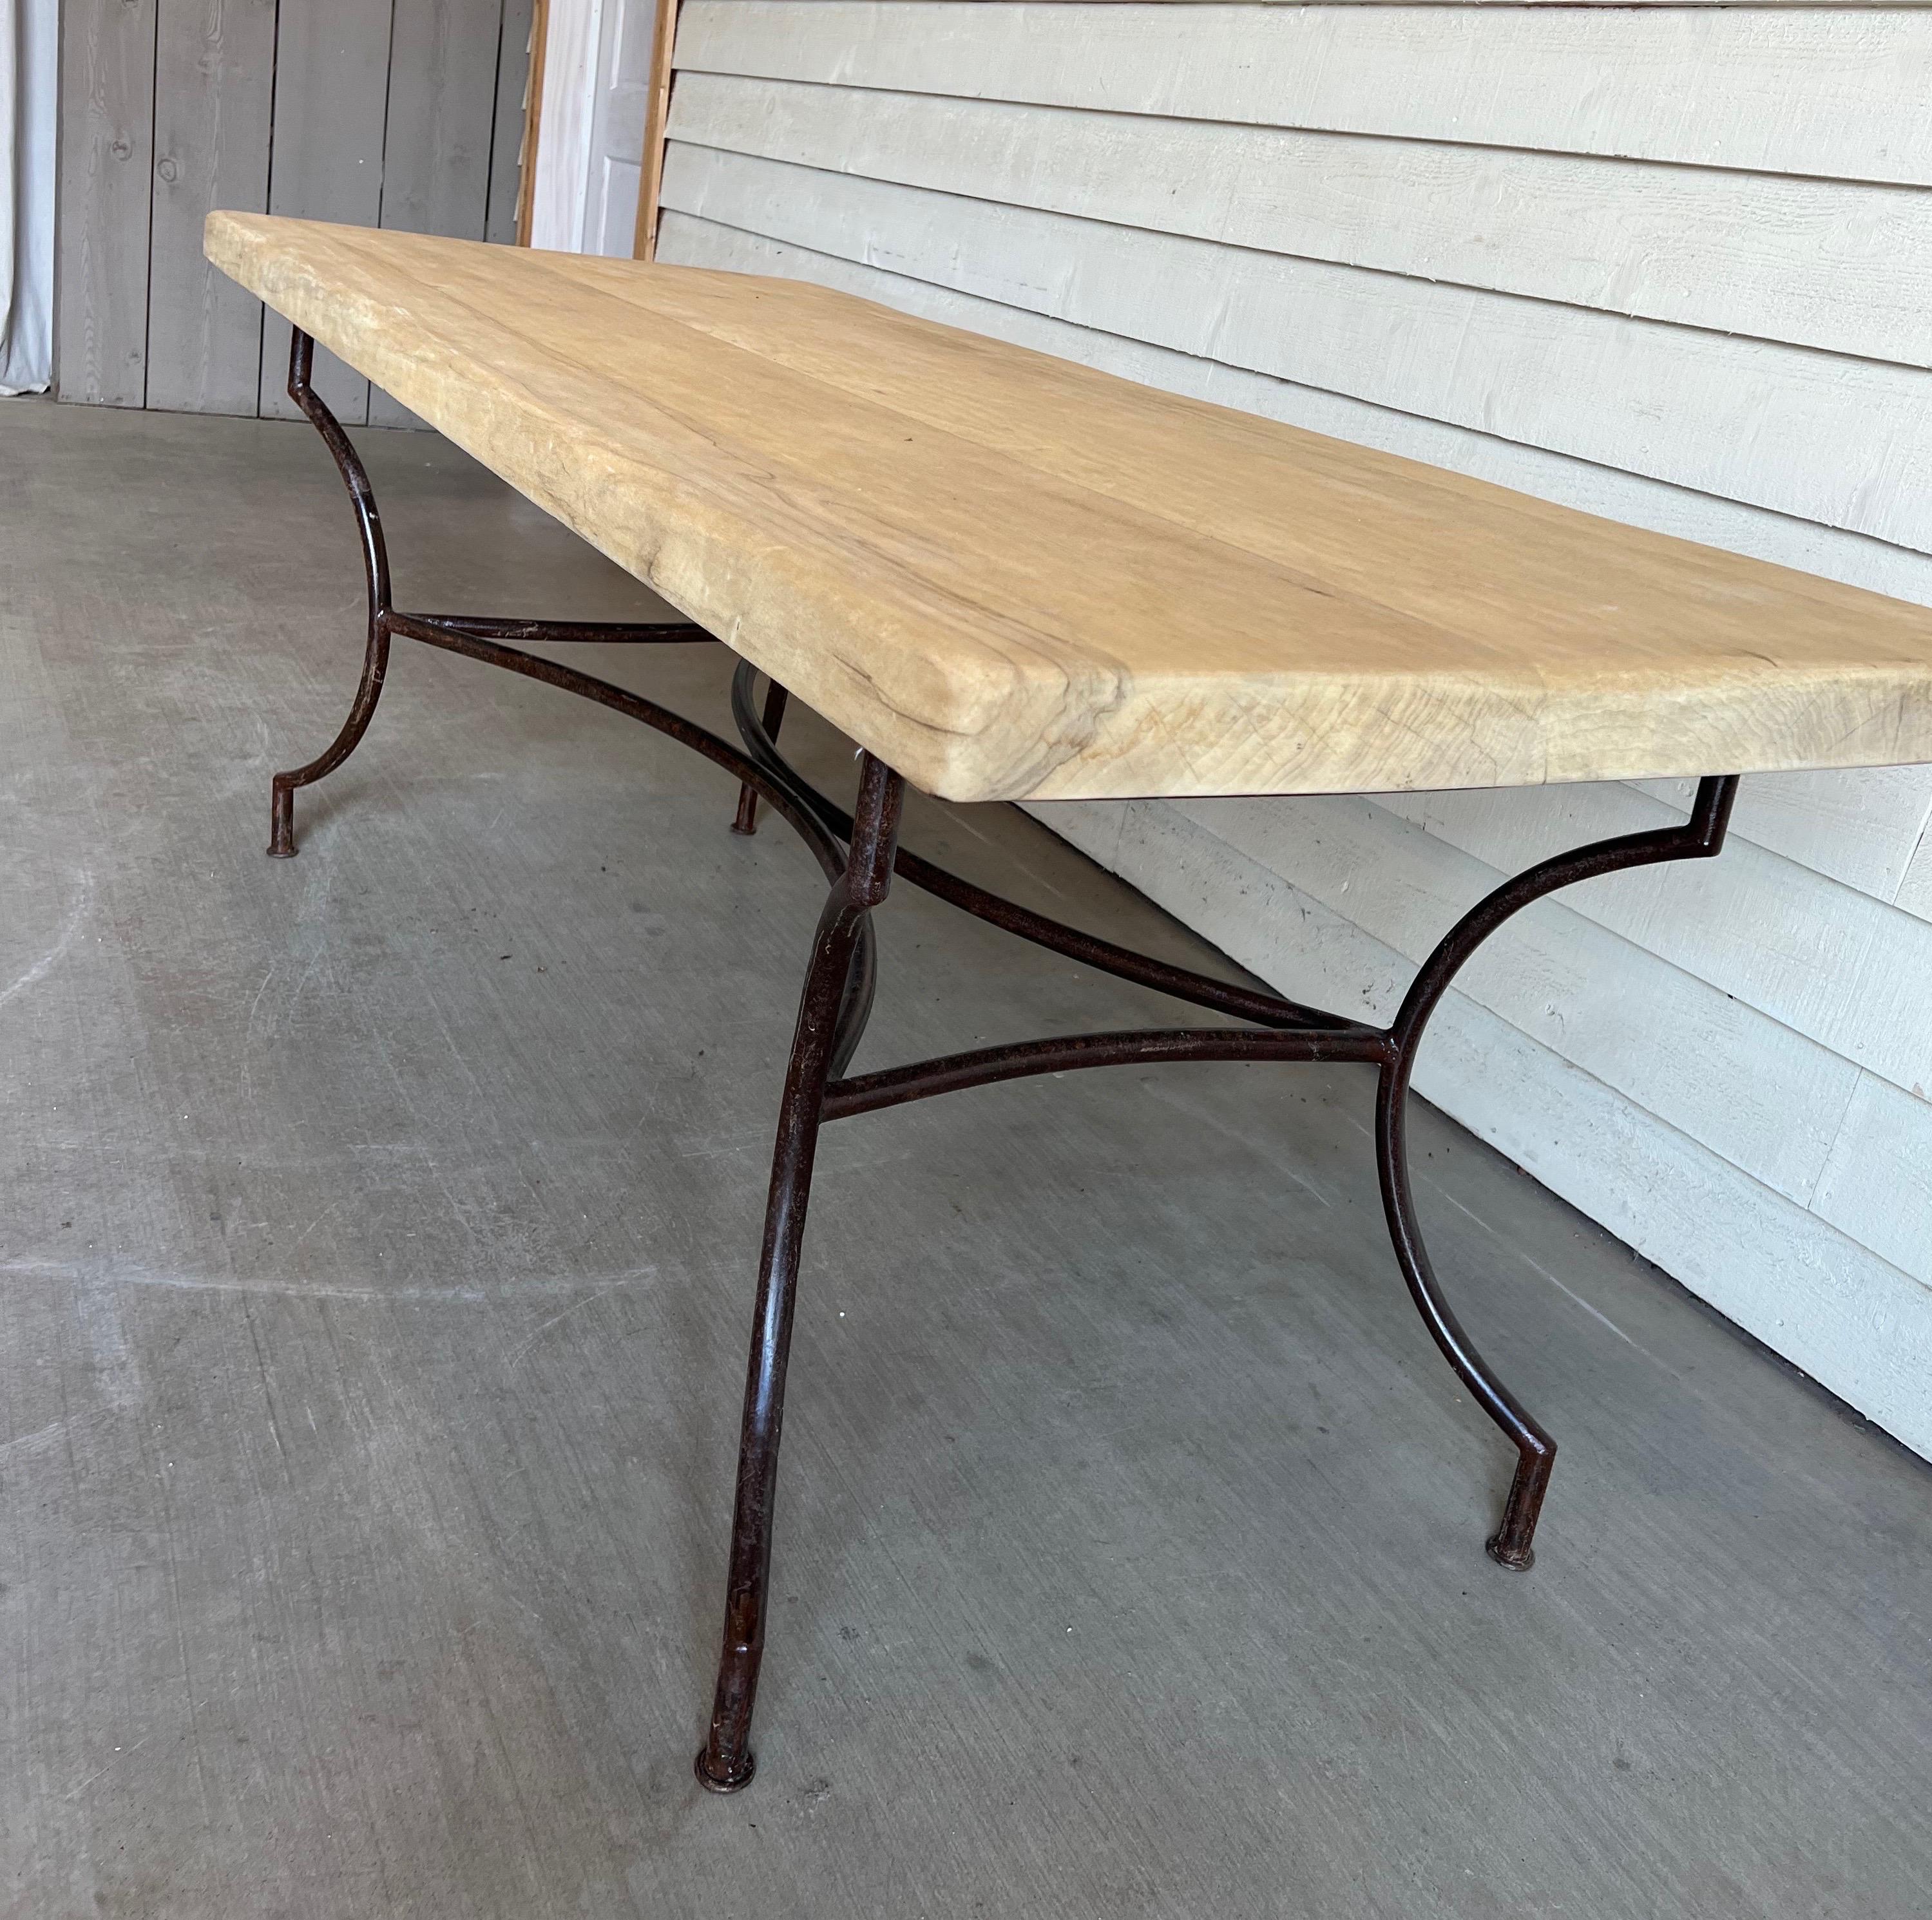 This vintage French dining table includes a very thick and heavy oak top that's been stripped and bleached and sits atop a hand crafted iron base. This piece is very sturdy and has lovely lines. Would also be beautiful as a large scale desk.